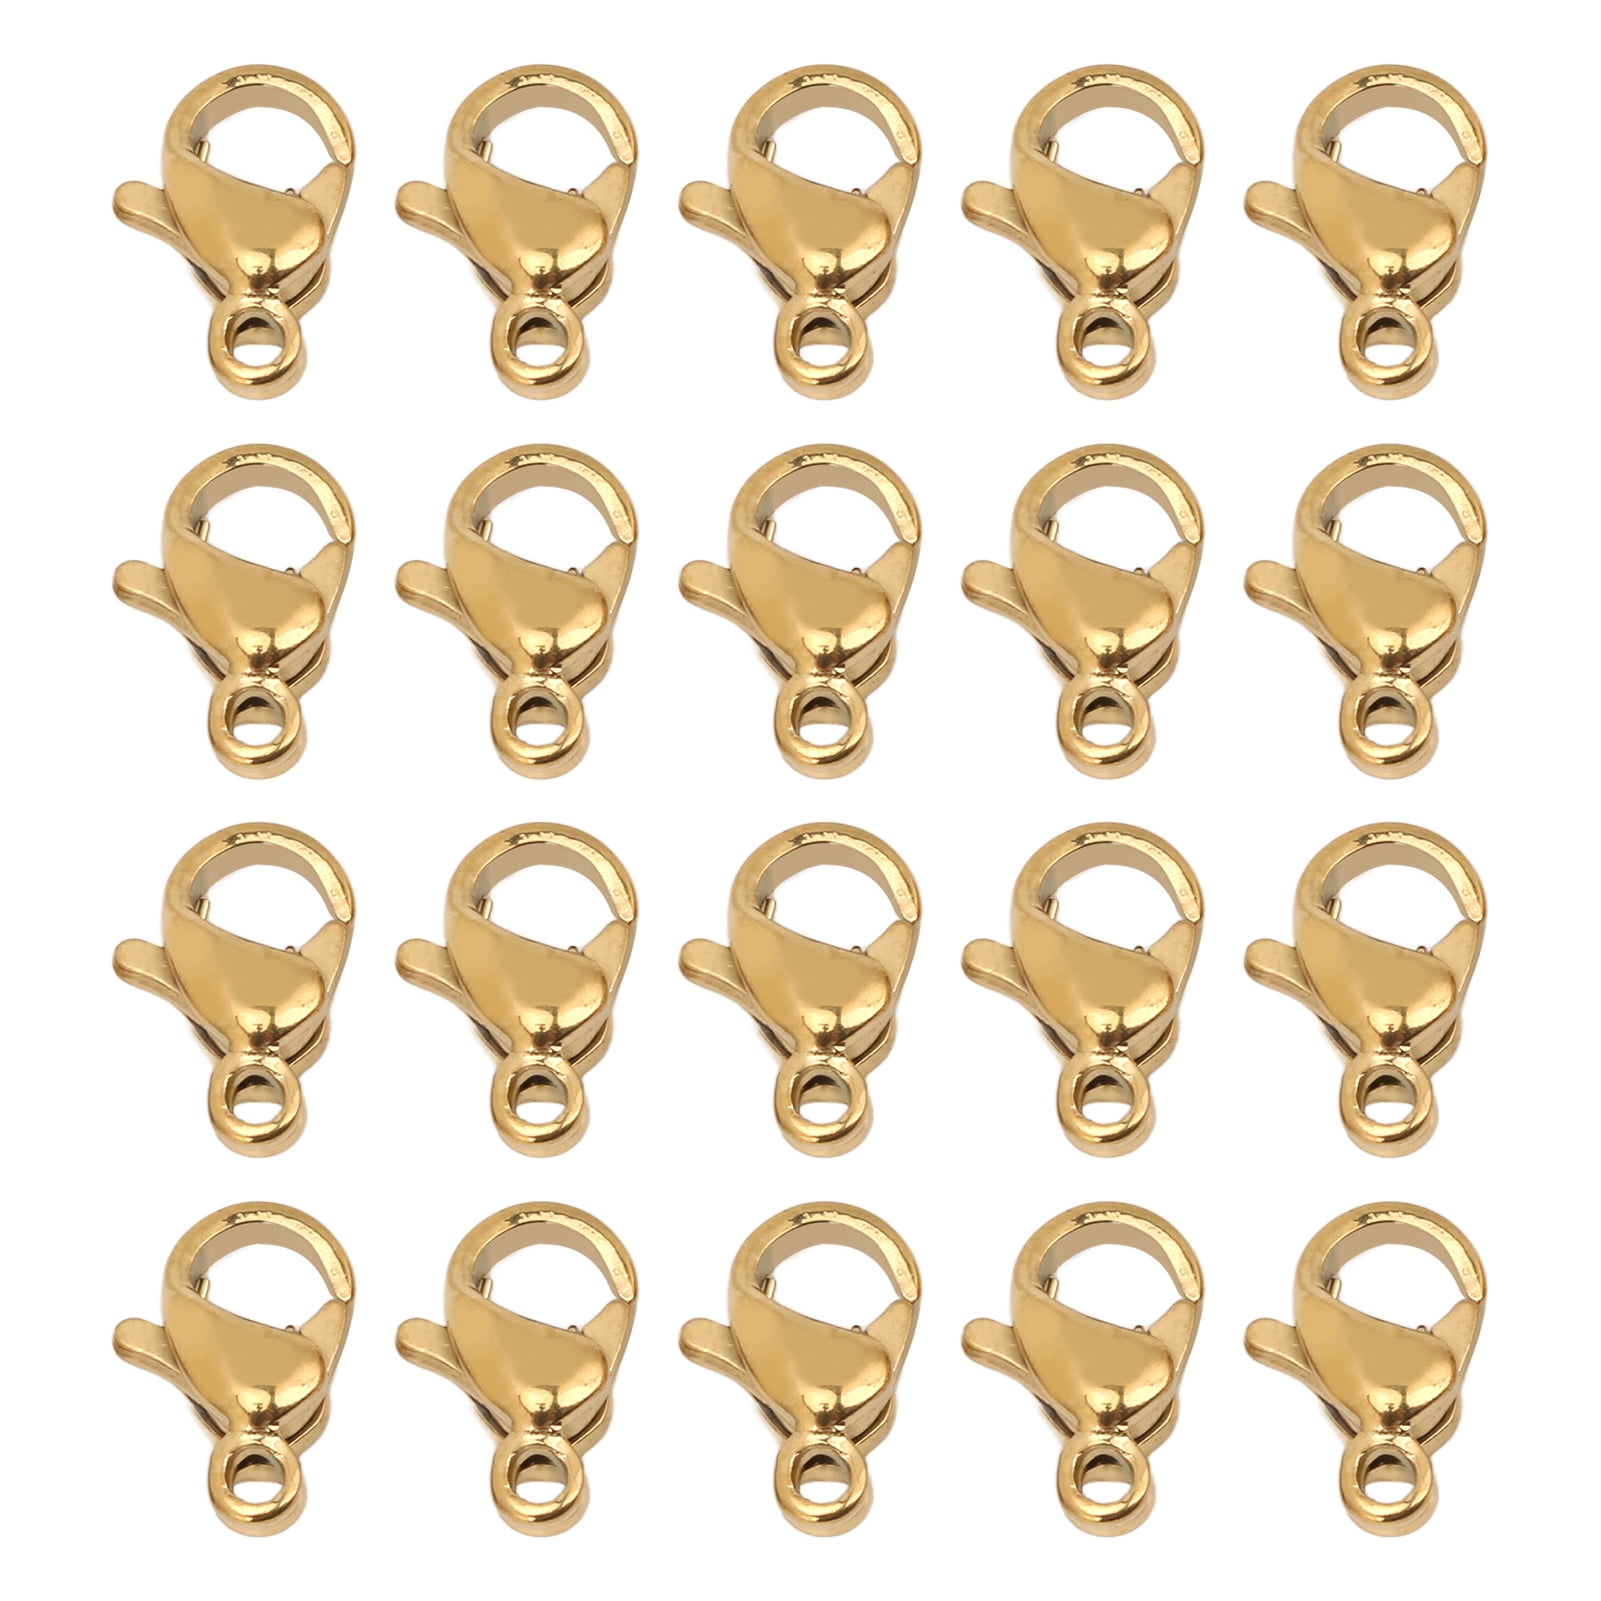 Stainless Steel Lobster Clasp - 30pcs 16mm Metal Lobster Clasps